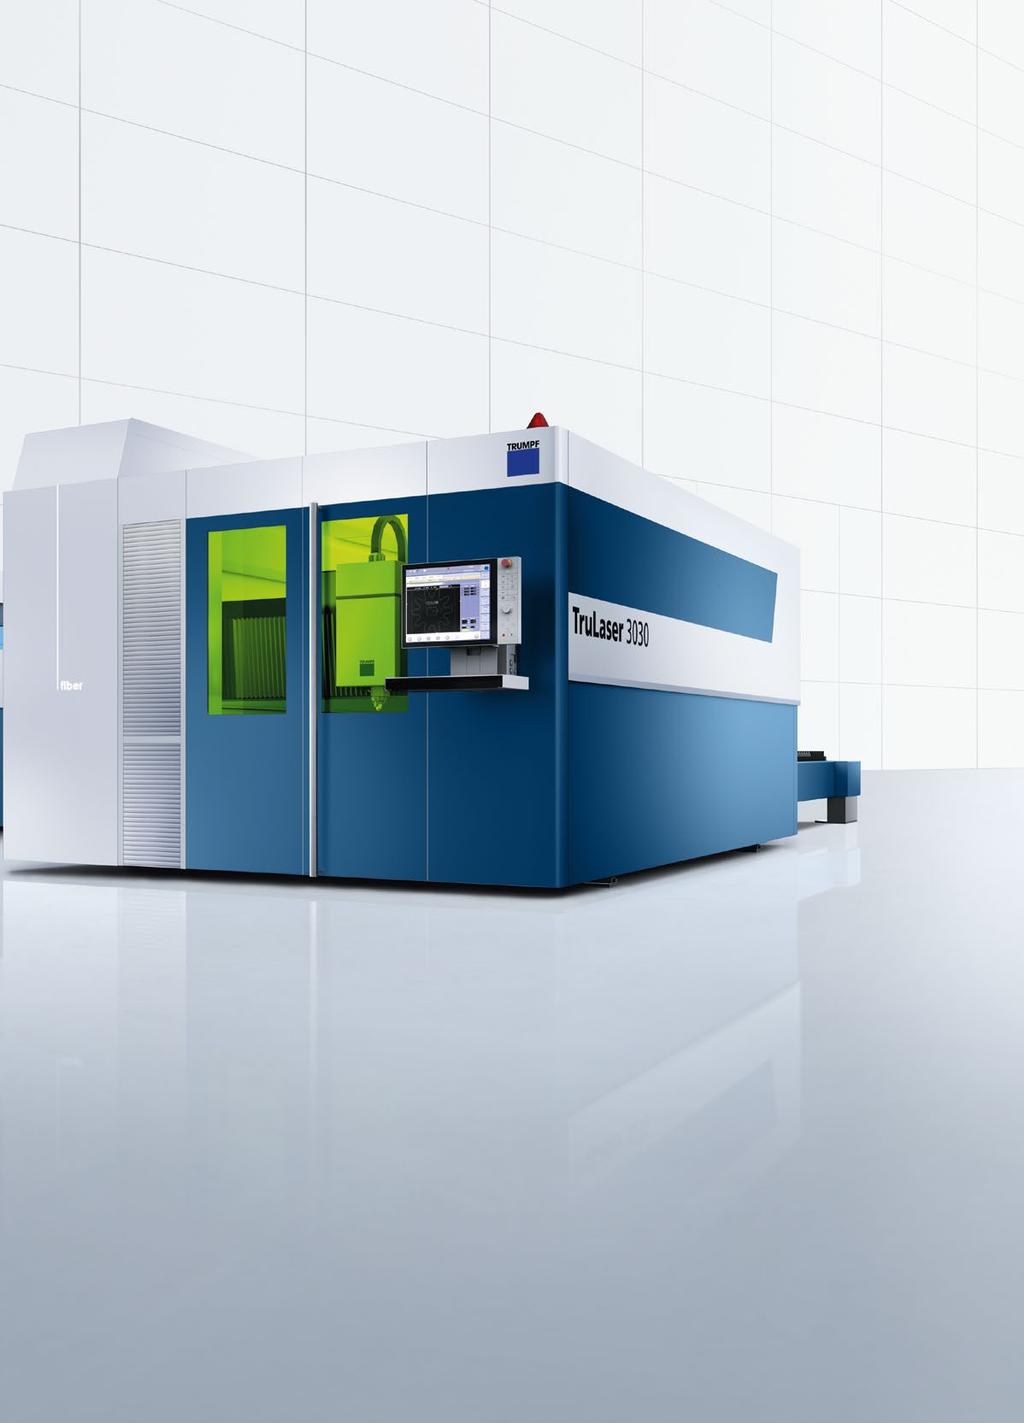 Series 3000 Products 17 The machines of the Series 3000 are true all-rounders in laser cutting, and are extremely